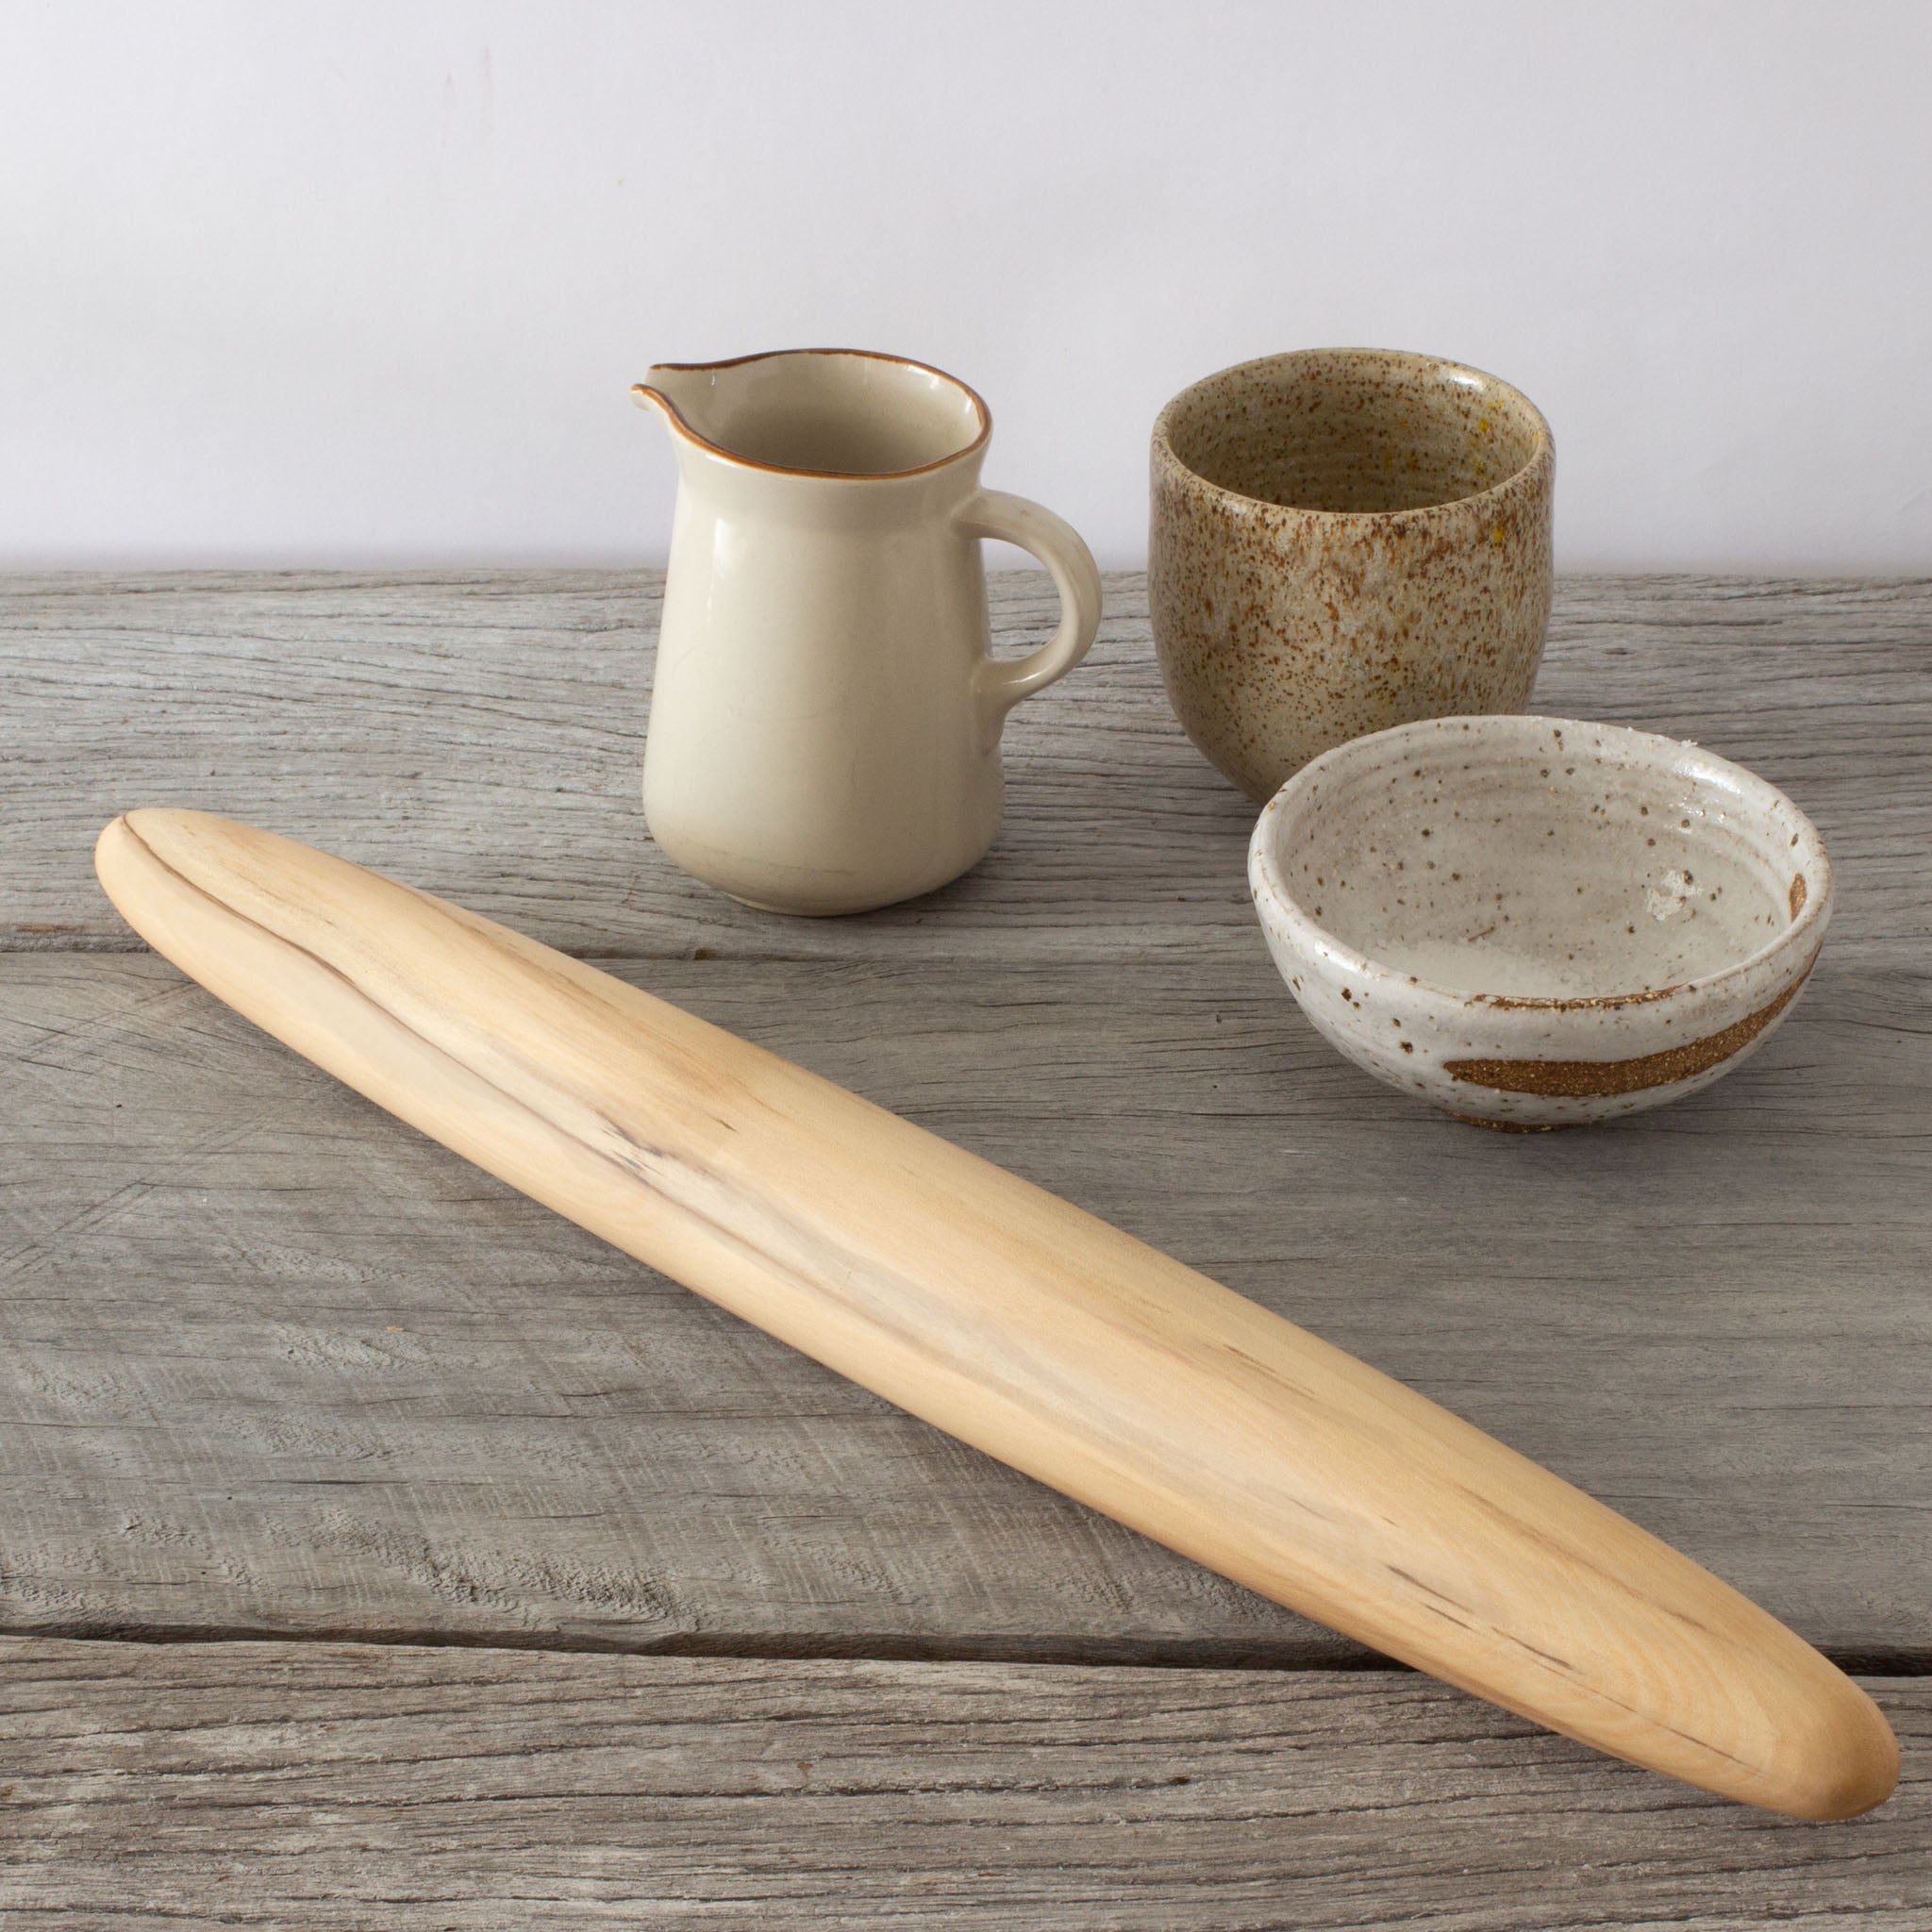 Buy Handmade French Style Rolling Pins Online Australian Woodwork